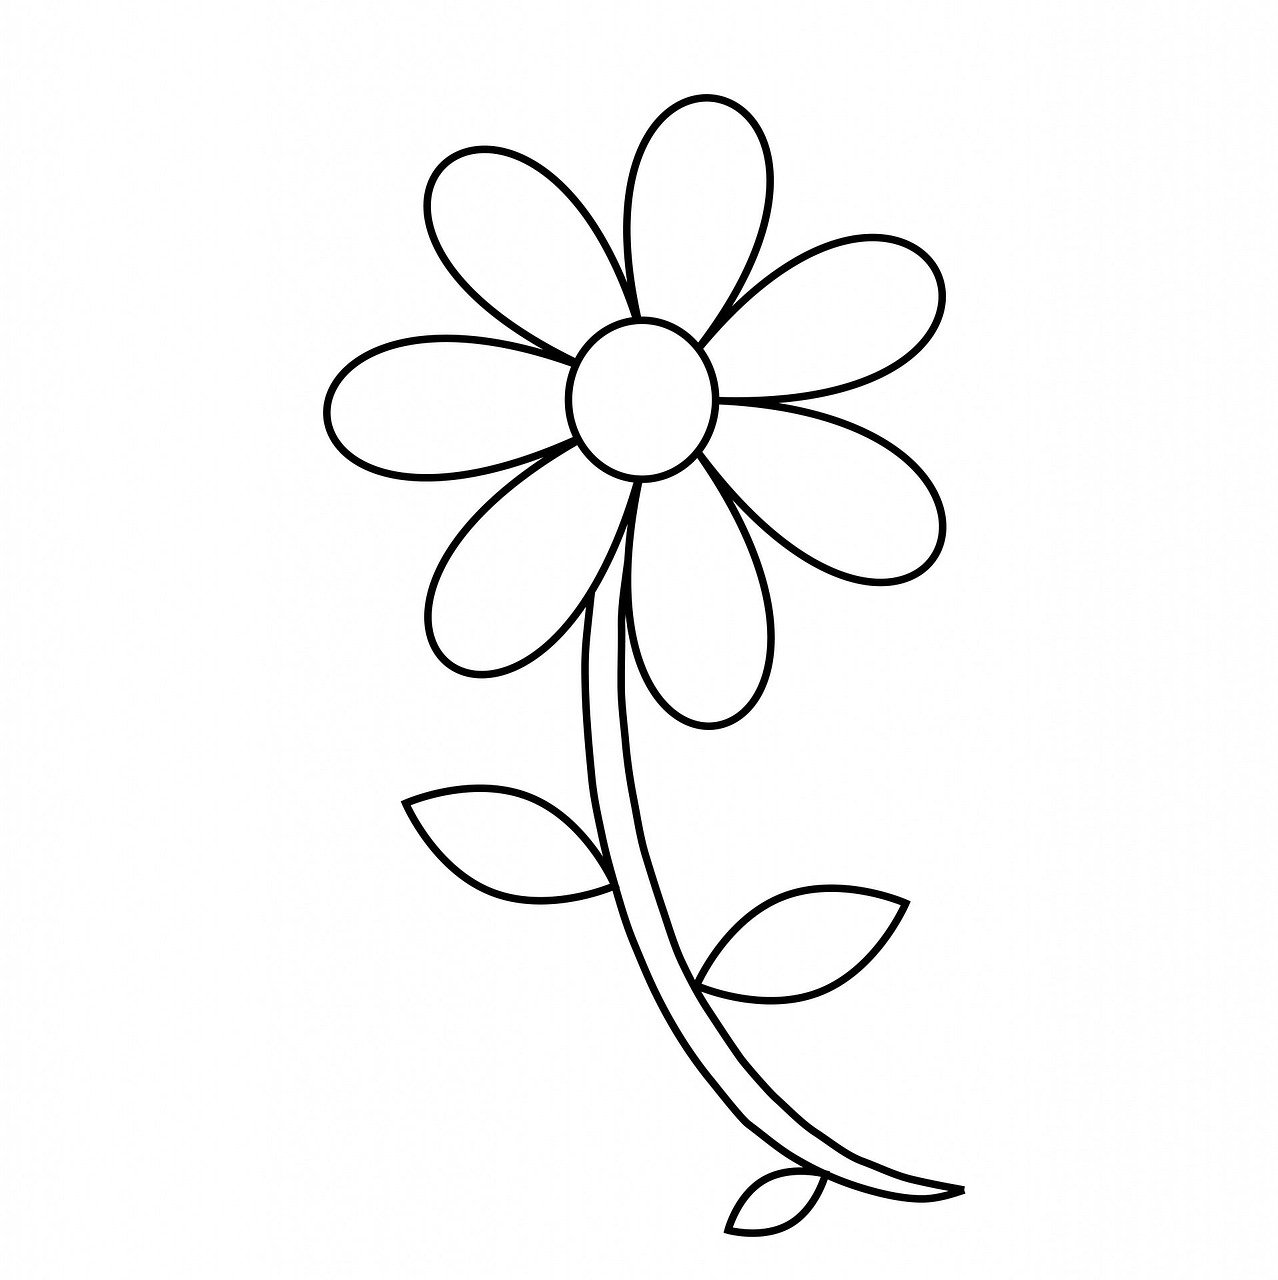 a black and white drawing of a flower, lineart, minimalism, children\'s book drawing, drawn in microsoft paint, 3/4 side view, colored accurately